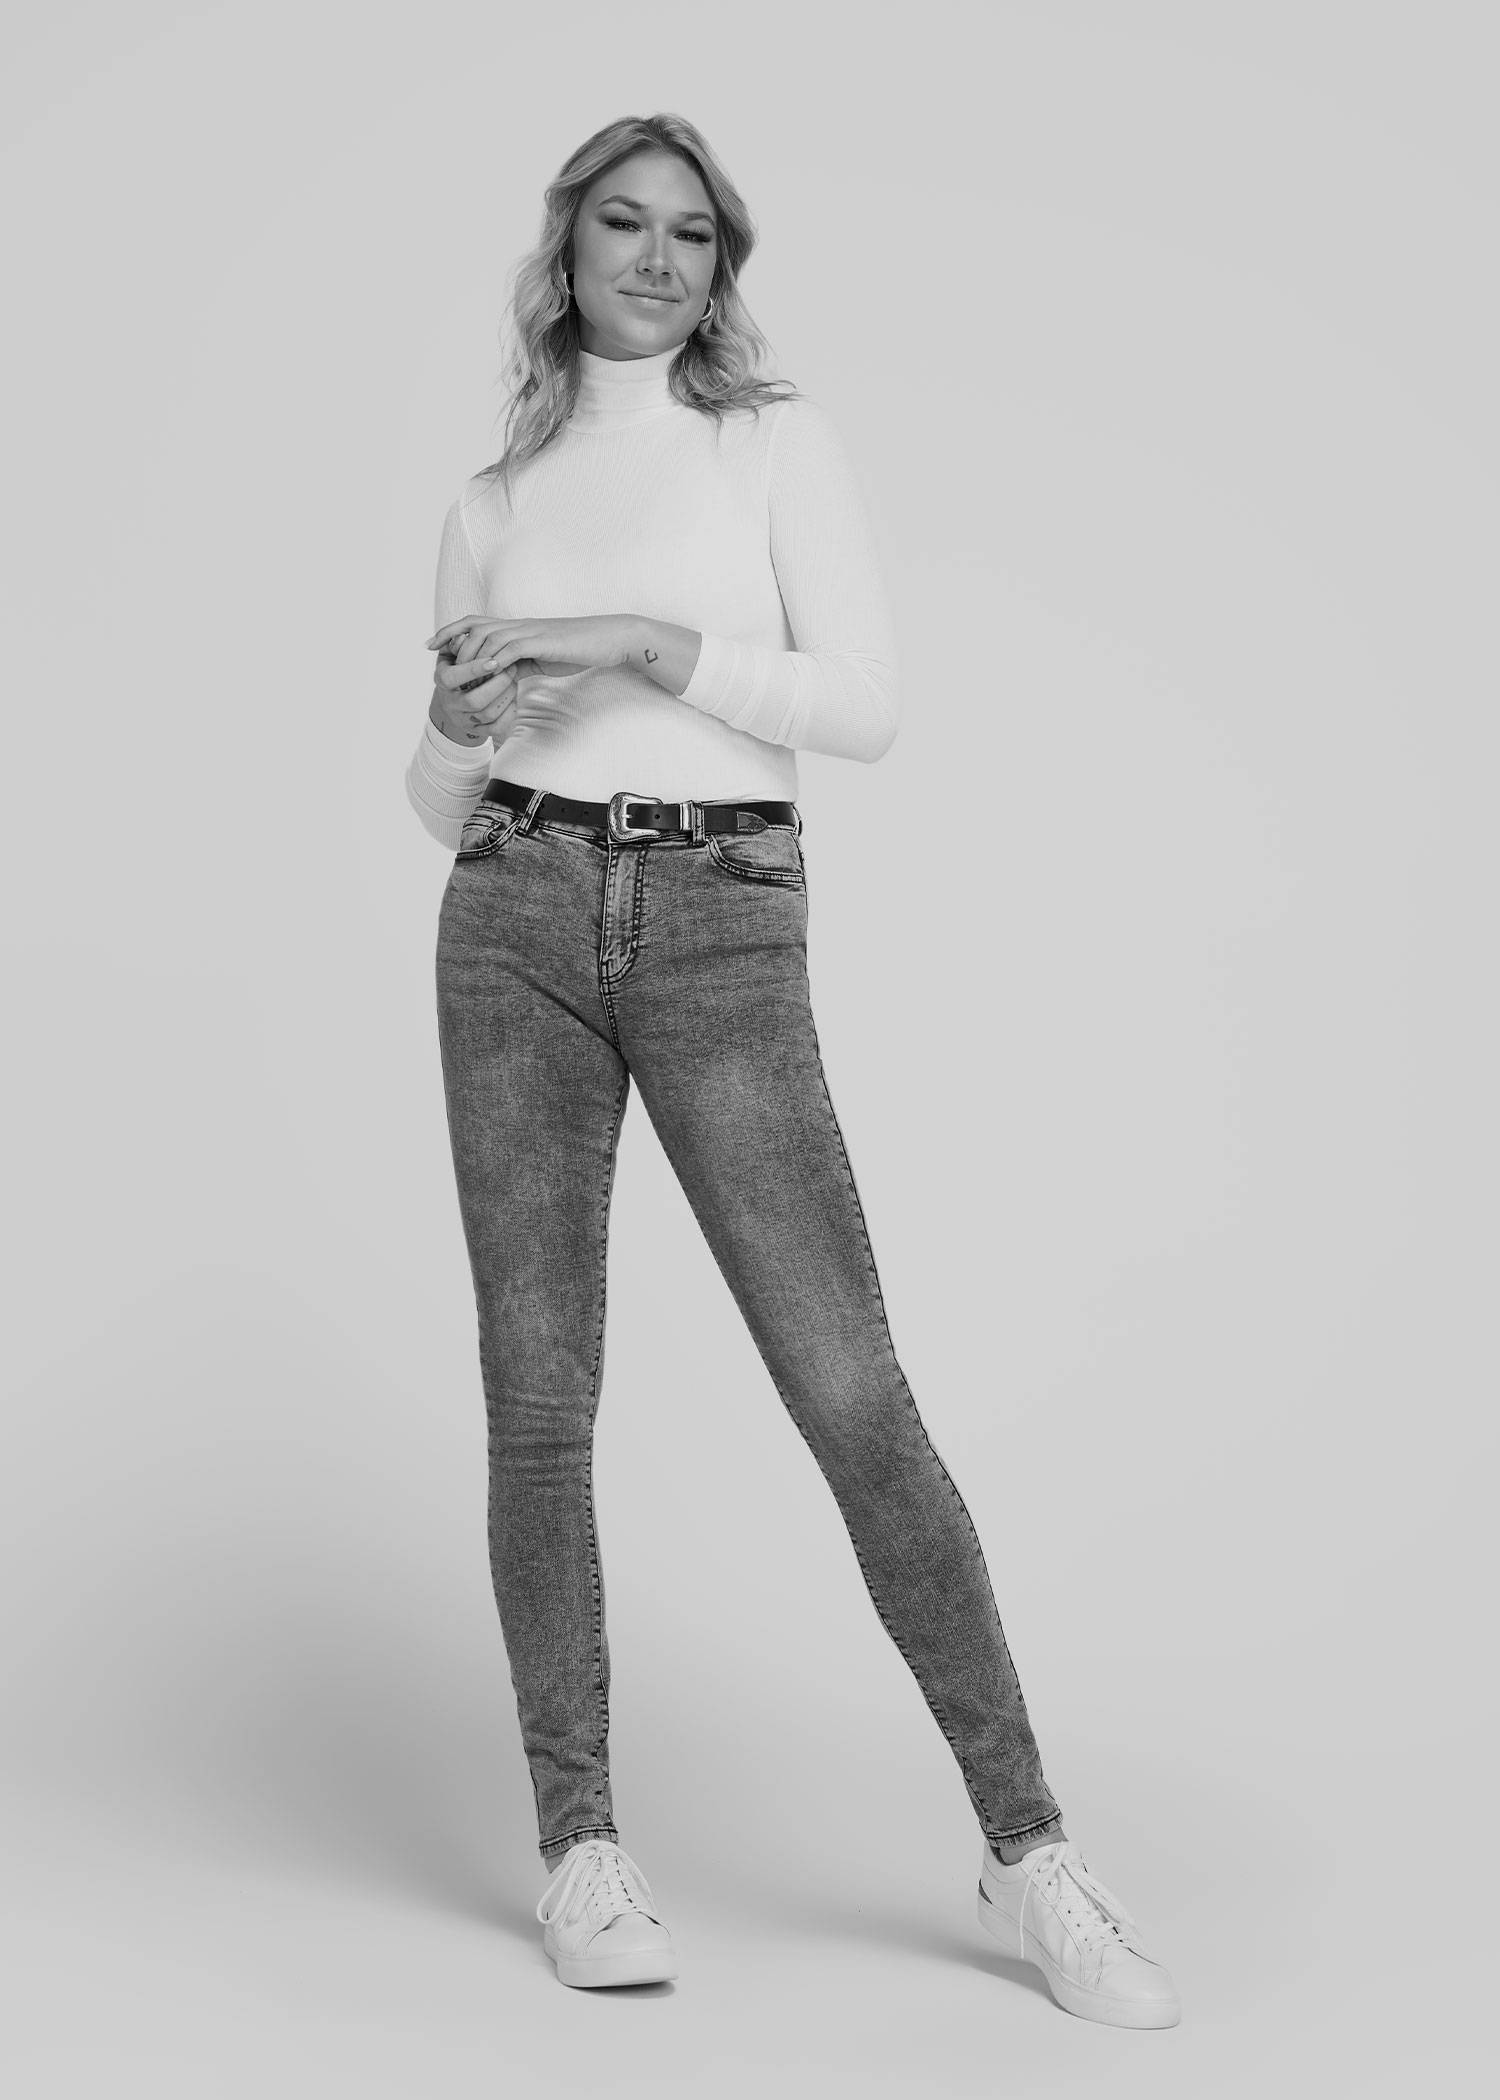 Tall model wearing a white turtleneck and grey jeans in black and white